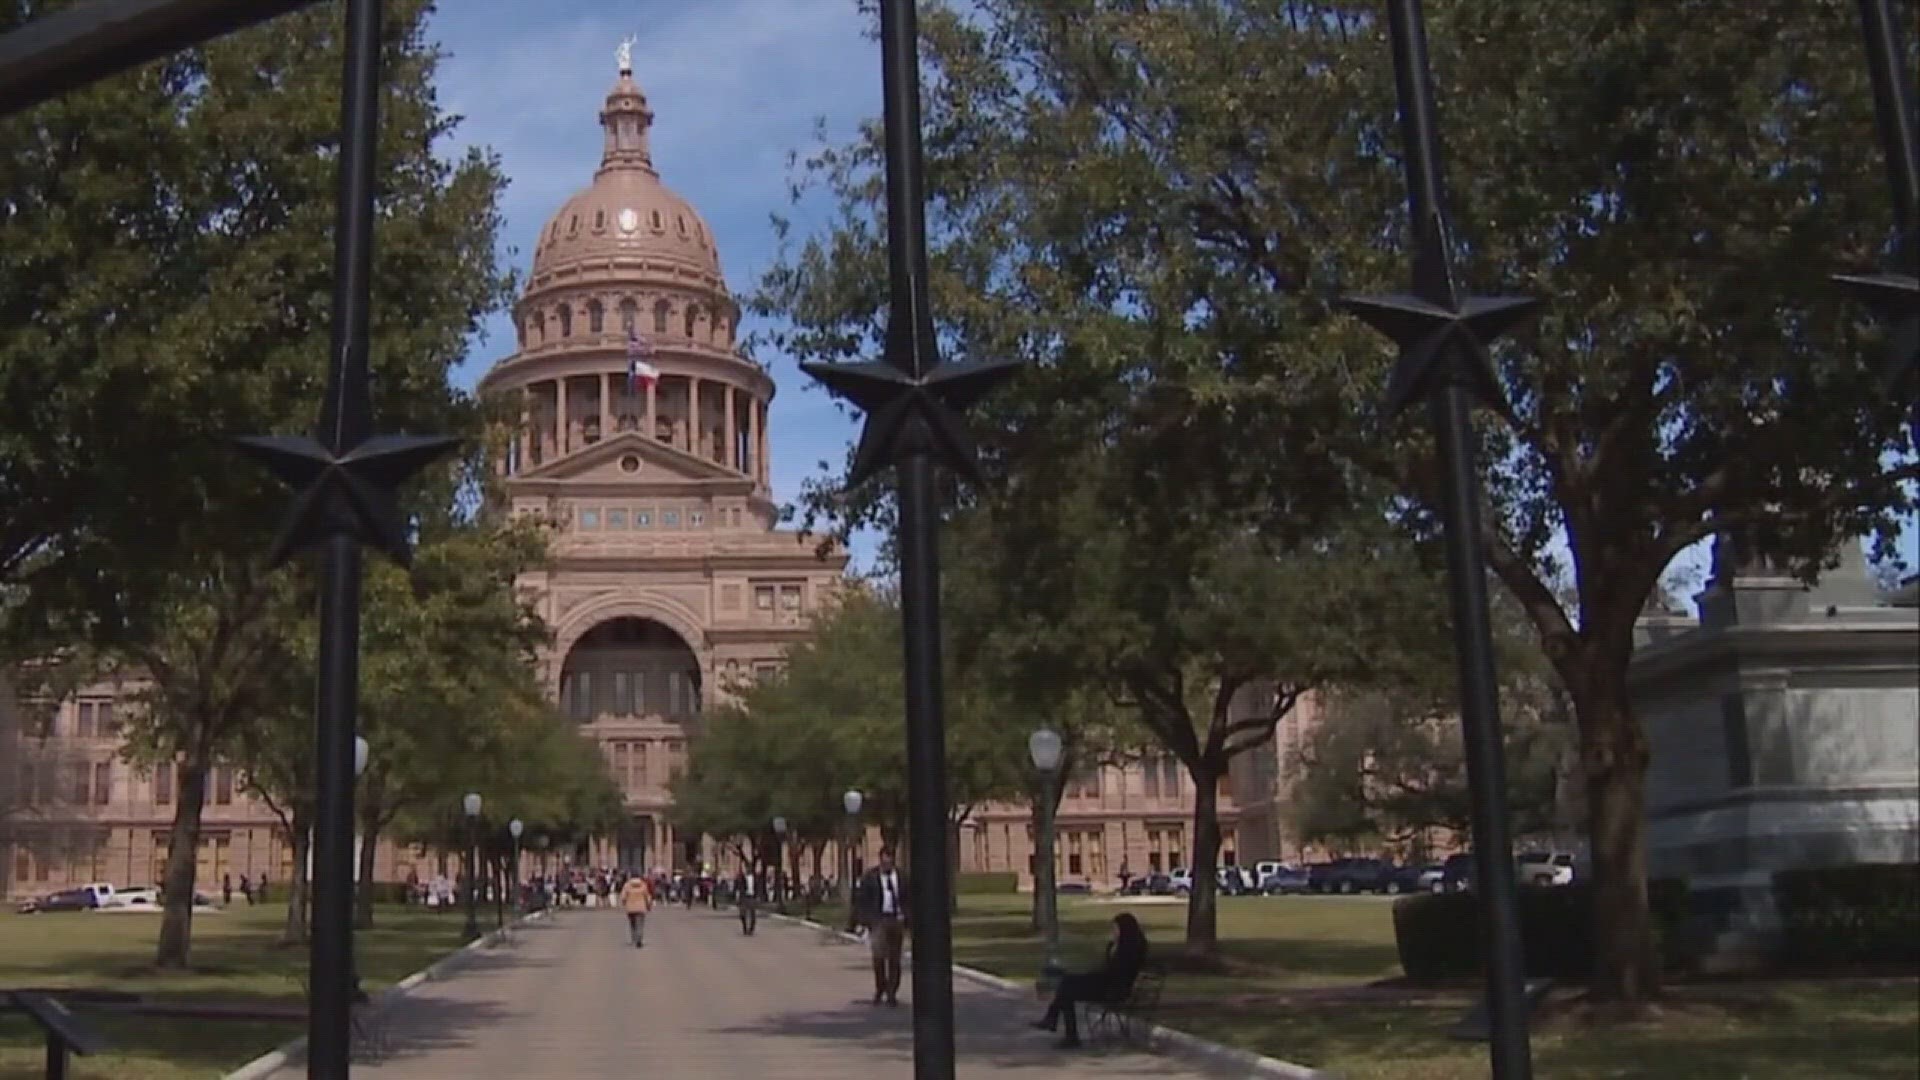 This third special session comes as a rift between the Texas House and the Senate grew following Attorney General Ken Paxton’s impeachment trial.